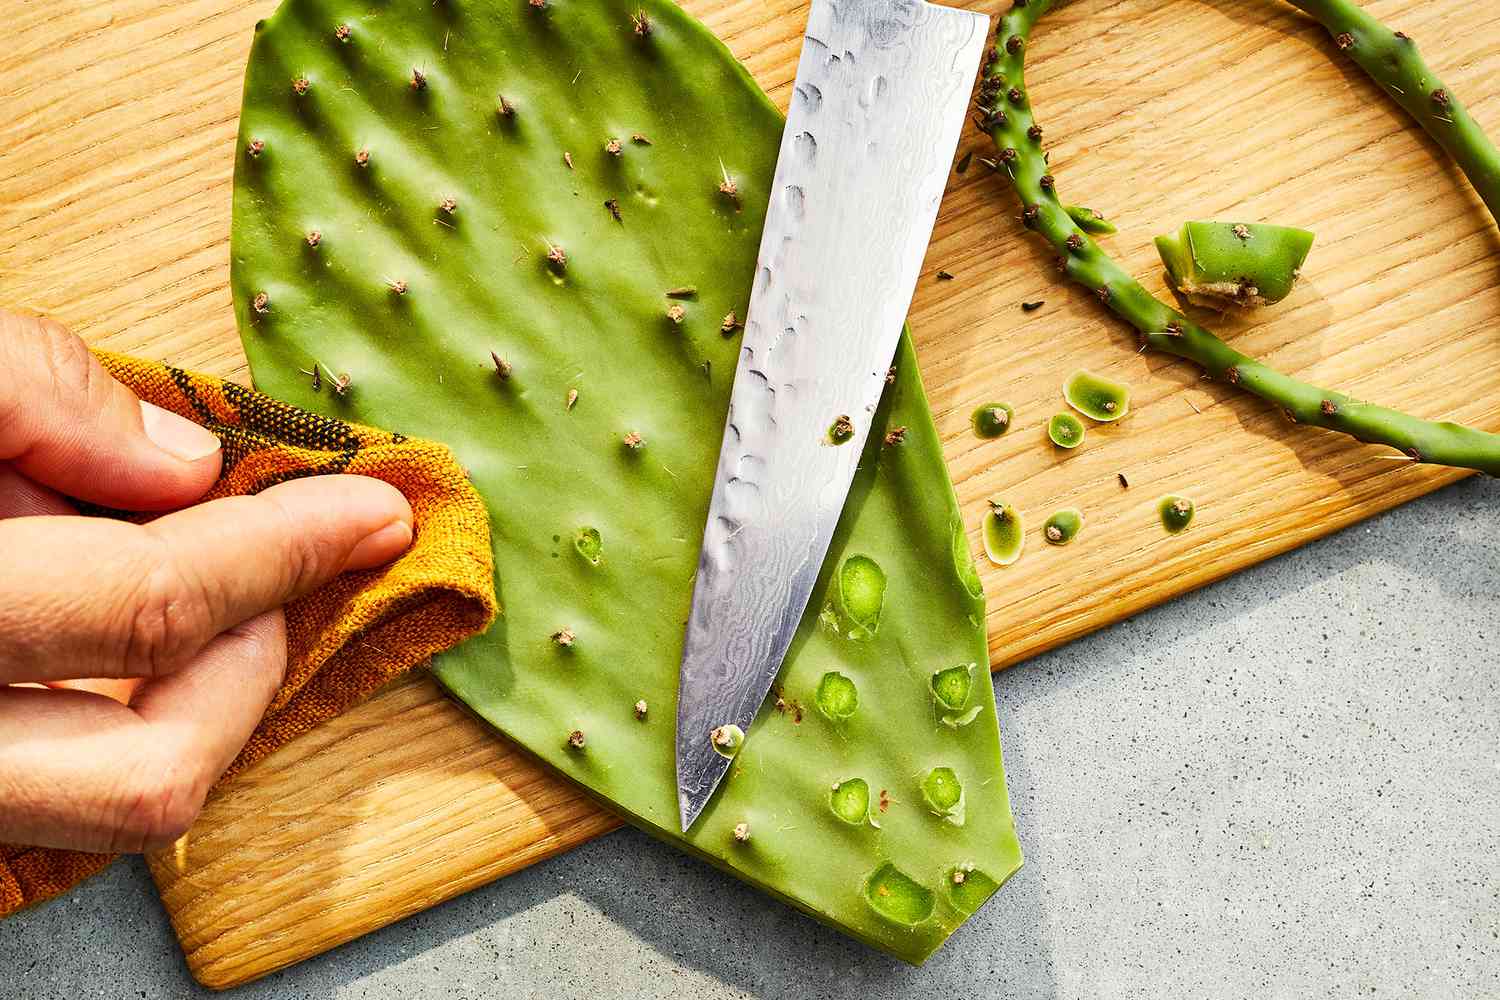 How to peel and cook nopales, the prickly pear cactus